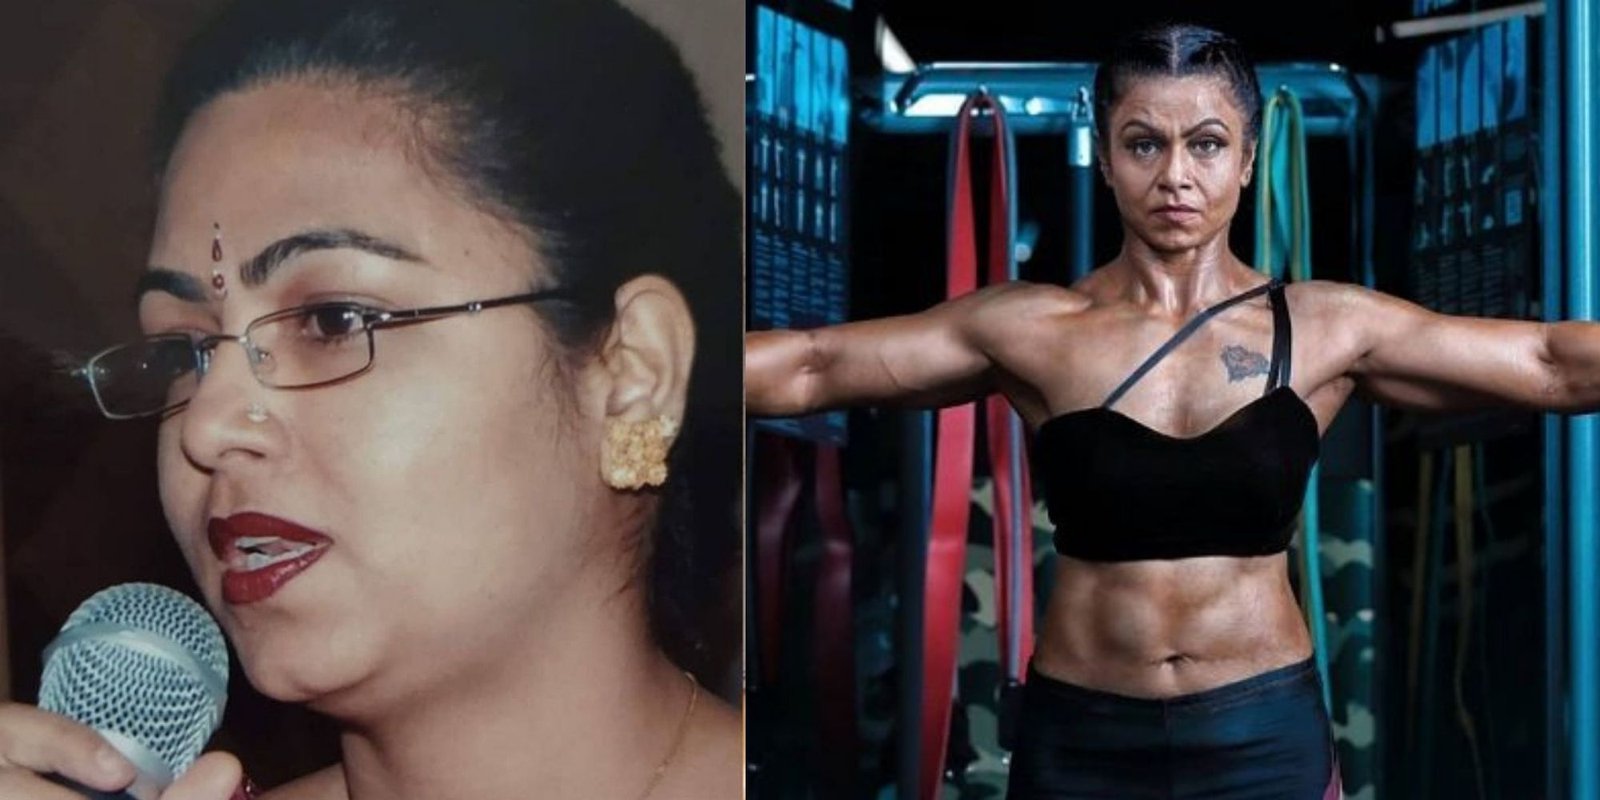 From A Housewife To A Bodybuilding Champion, The Inspiring Story Of Kiran Dembla Will Make You Get Up From Your Couch